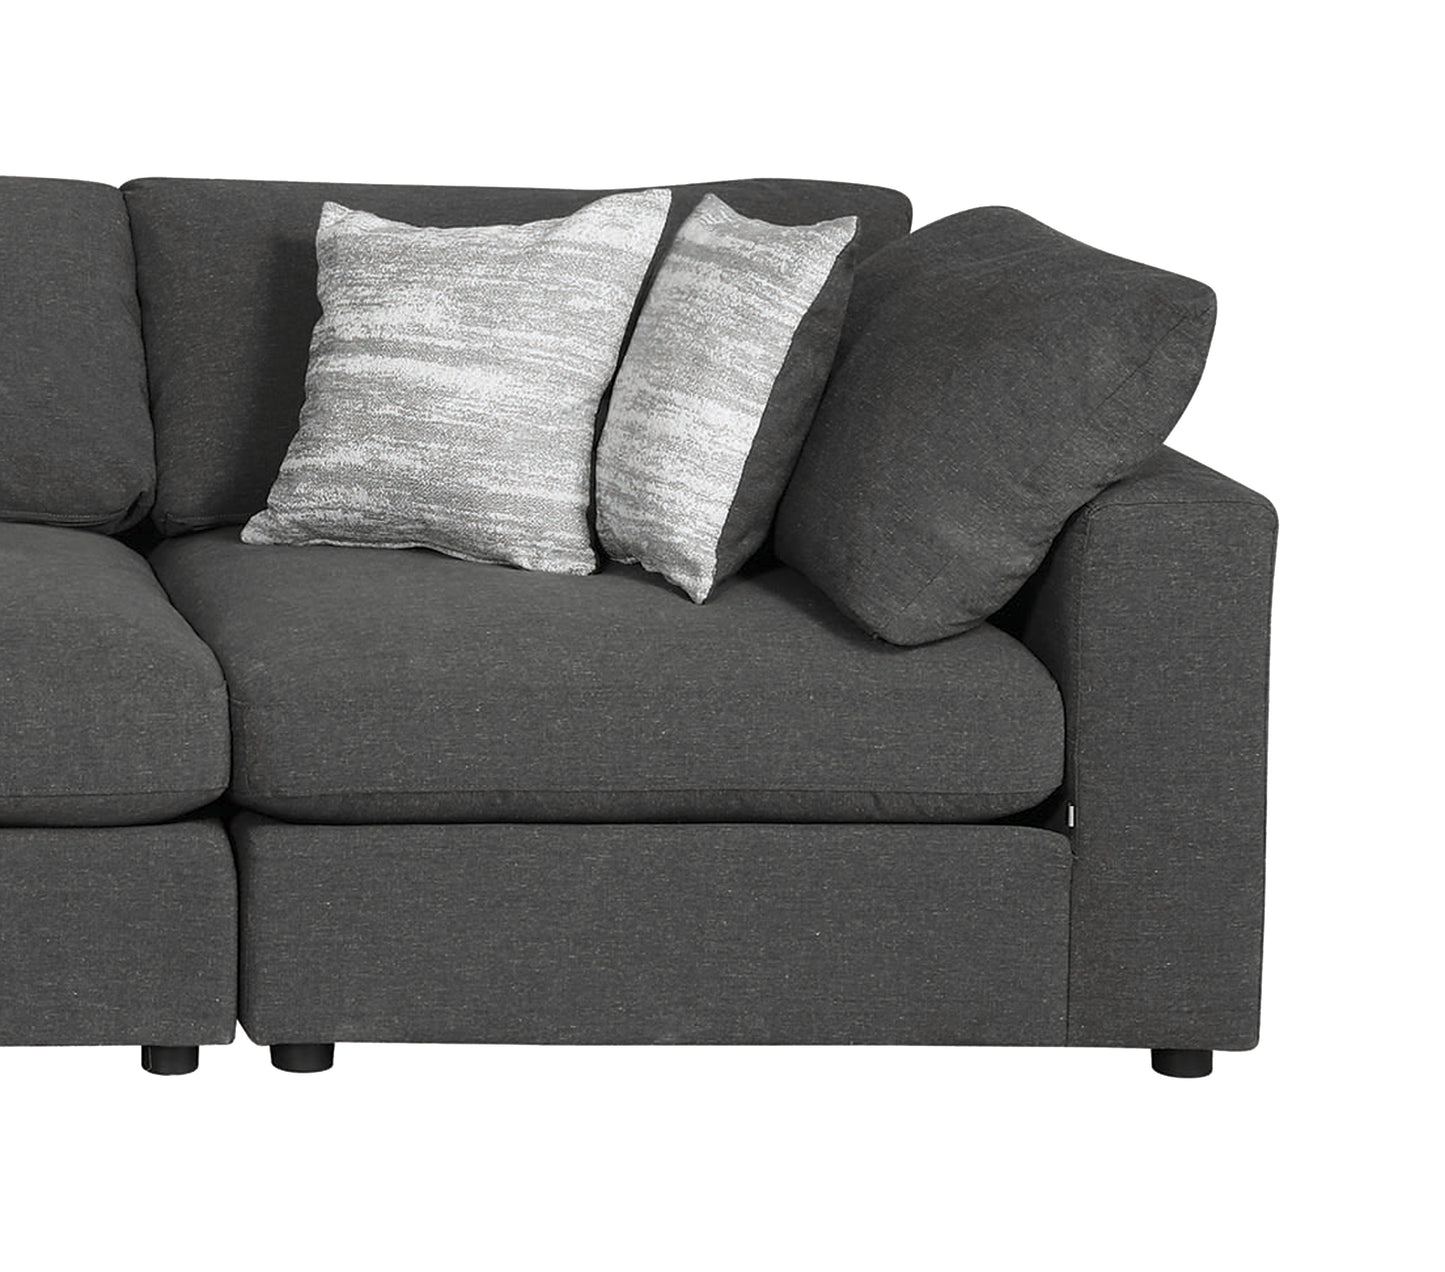 6-Piece Upholstered Modular Sectional Charcoal - 551324